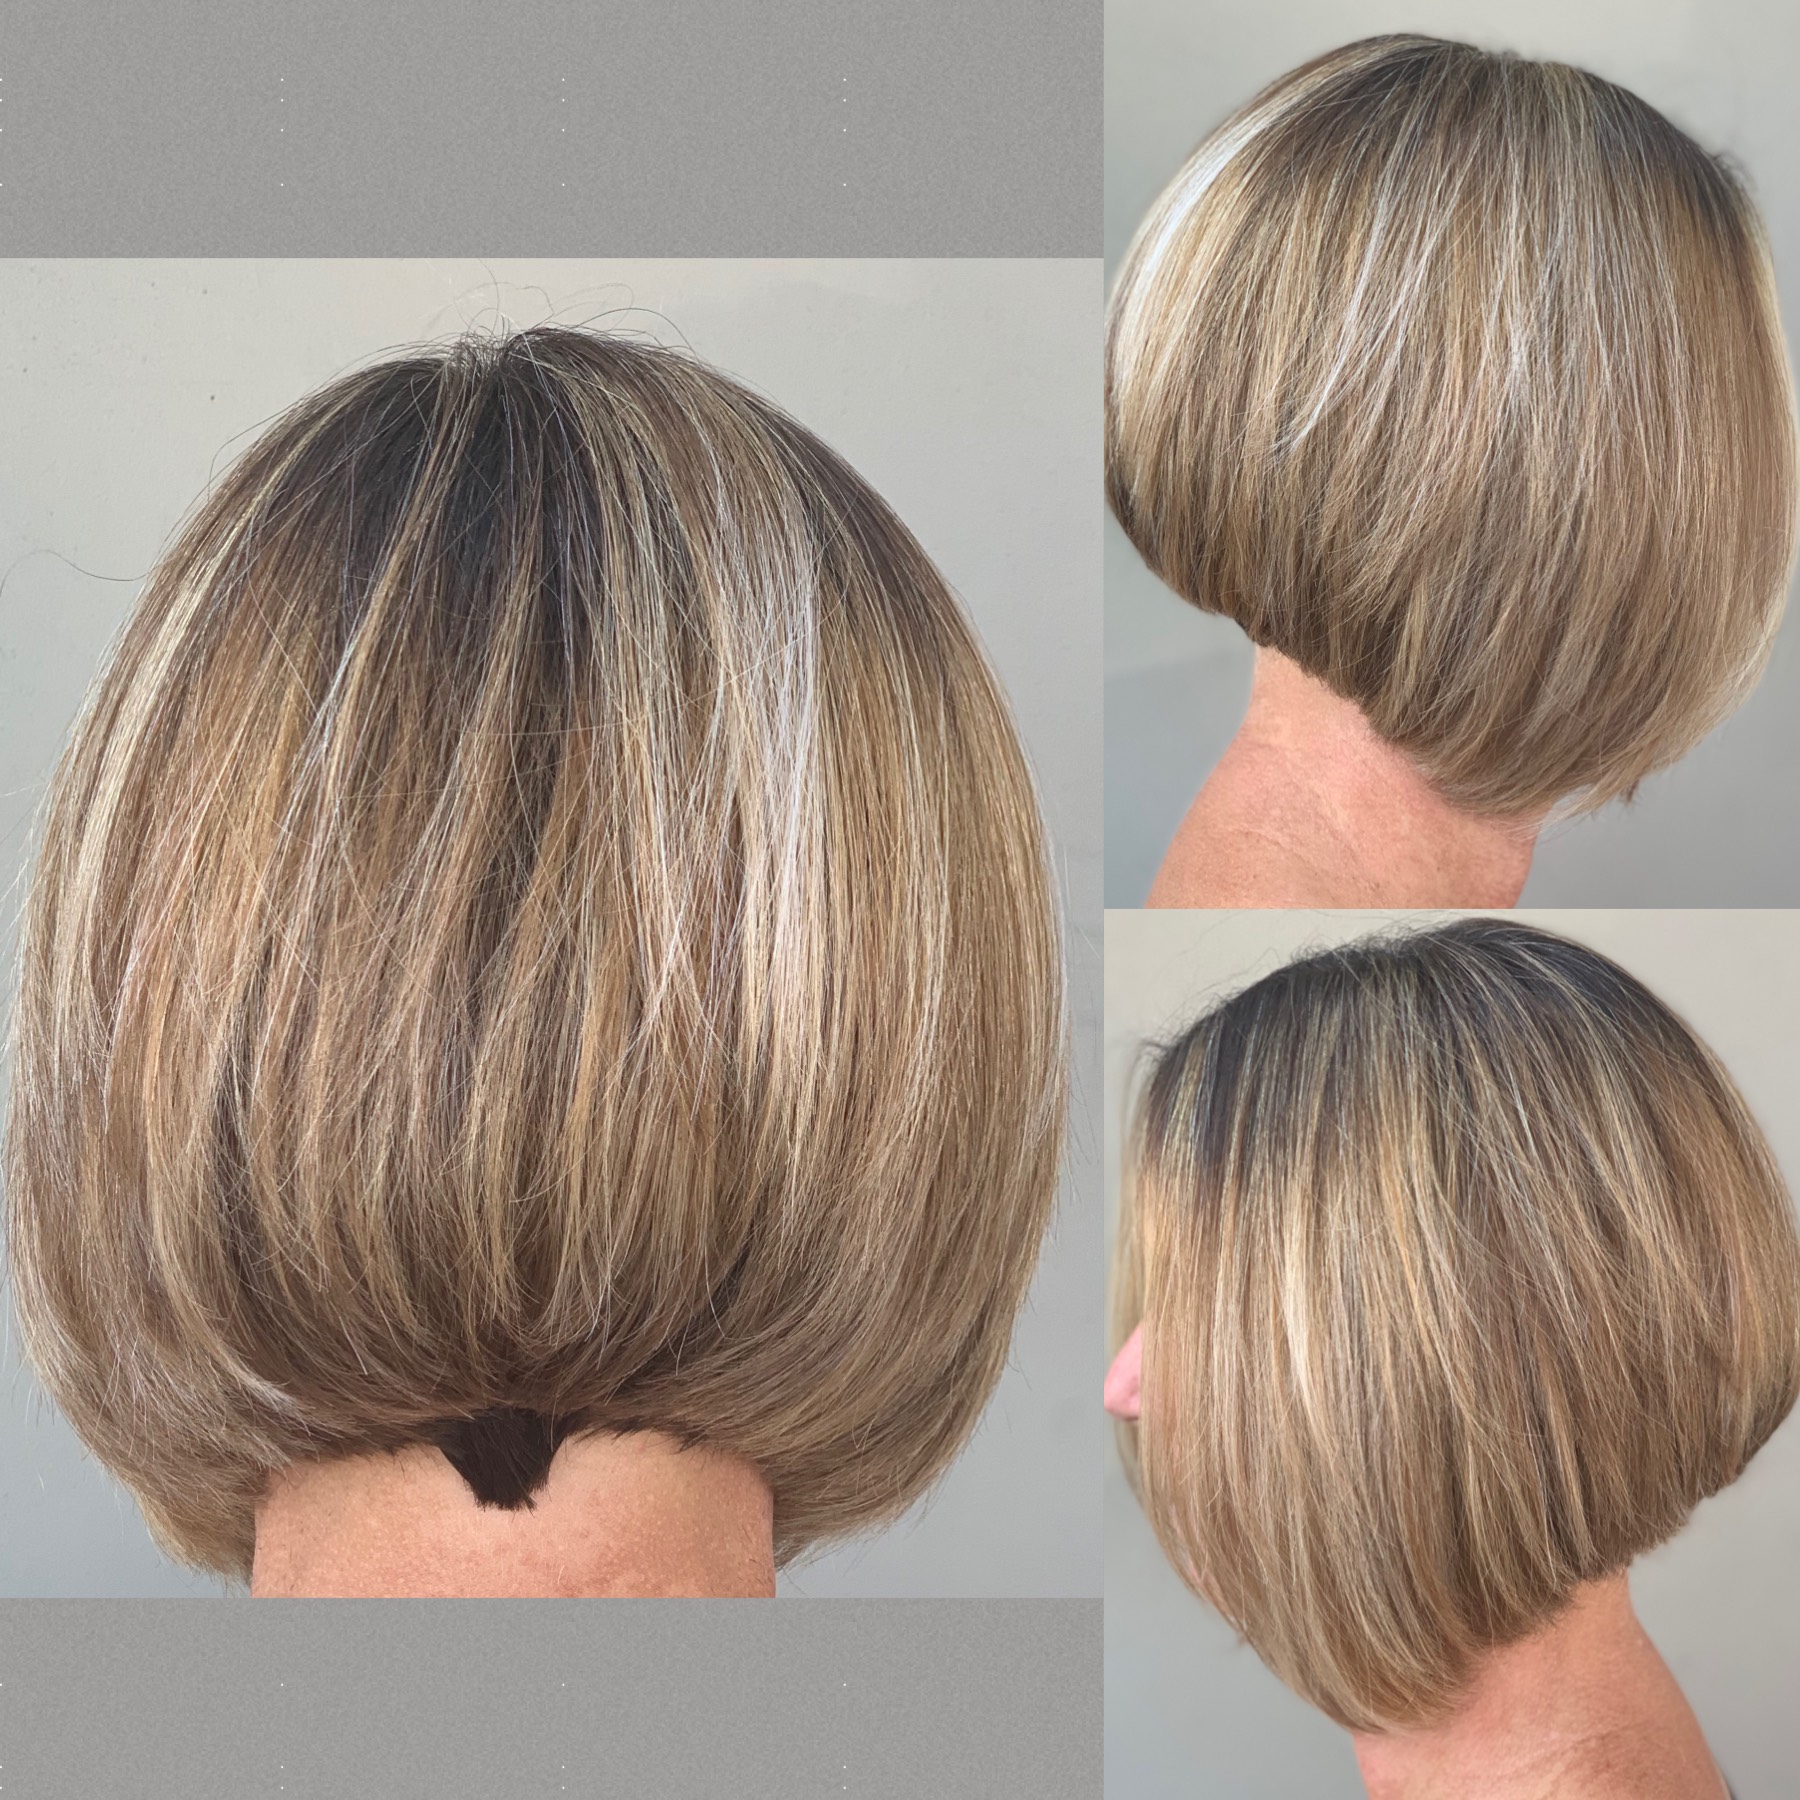 21 Short Haircuts That Will Inspire A Major Fall Transformation |  CafeMom.com